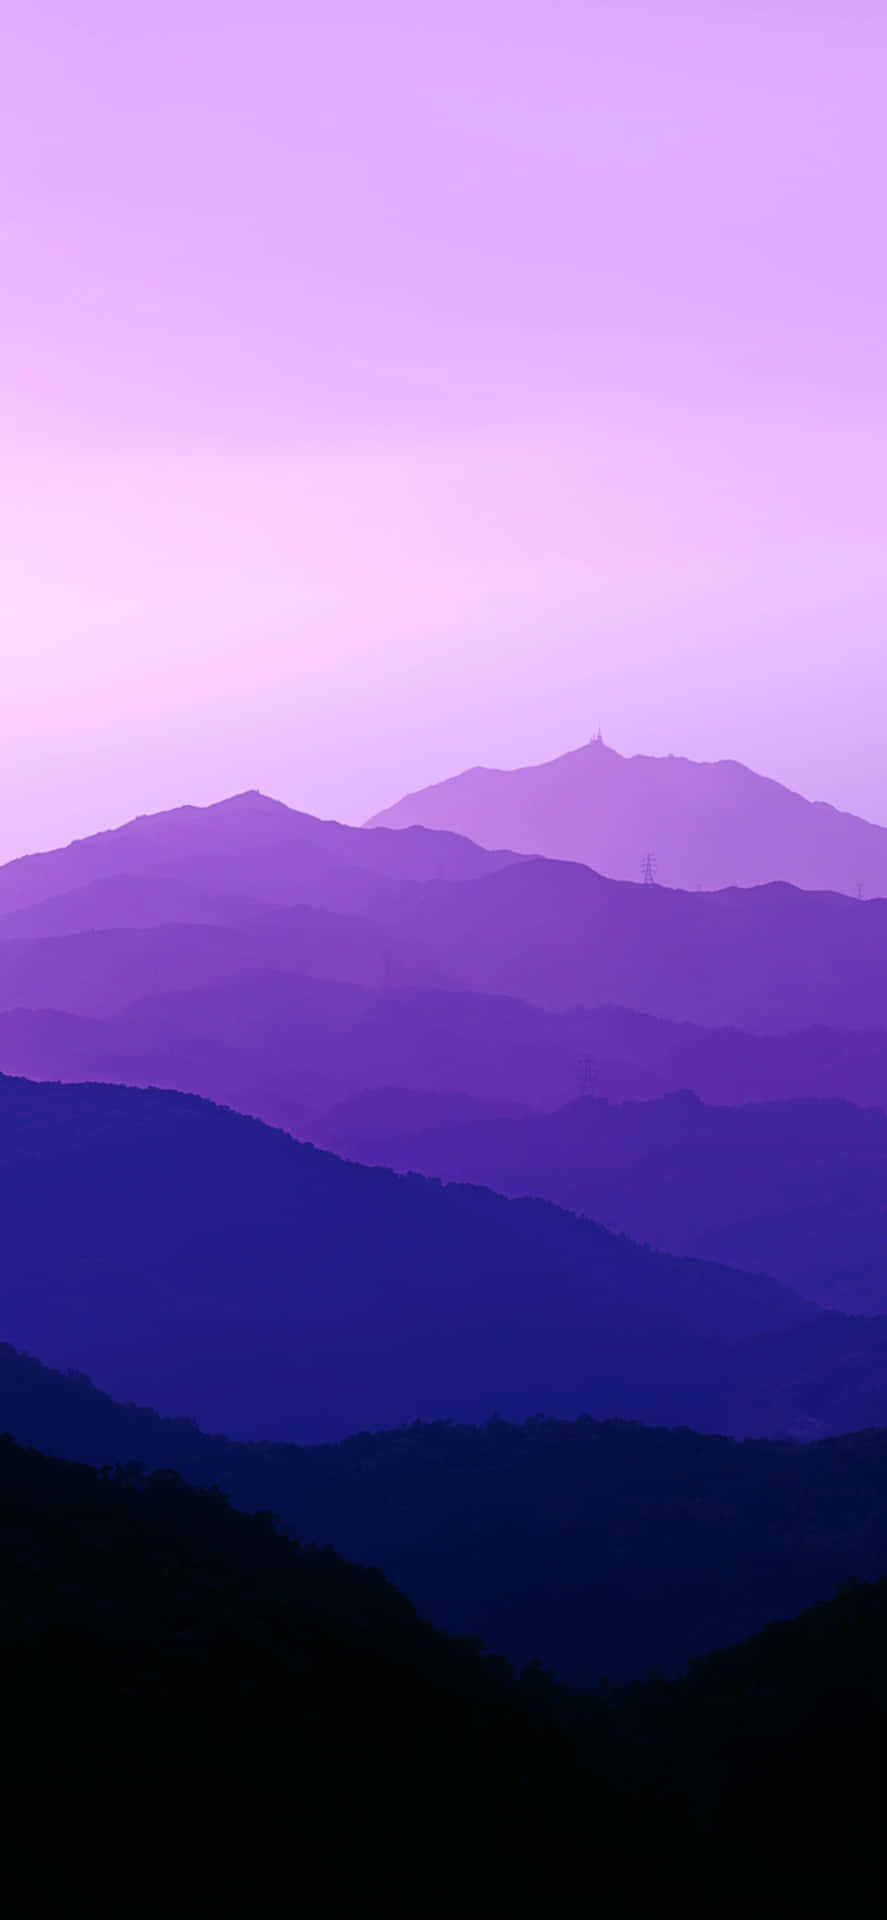 Take in the beautiful blue and purple hues of a stunning sunset Wallpaper